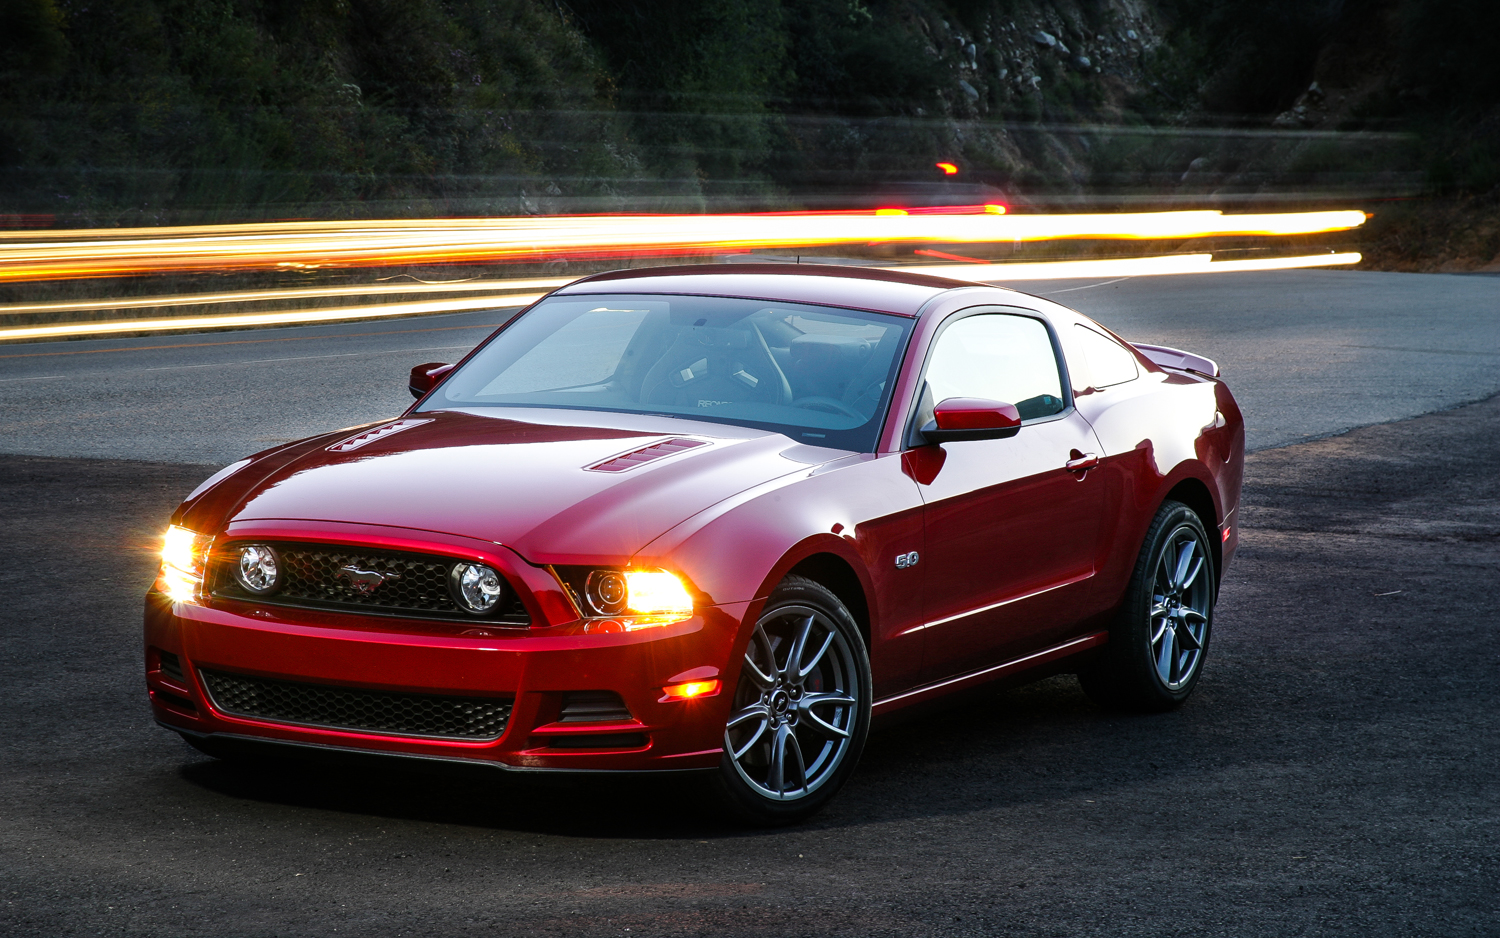 Used 2015 Ford Mustang Pricing - Edmunds.com